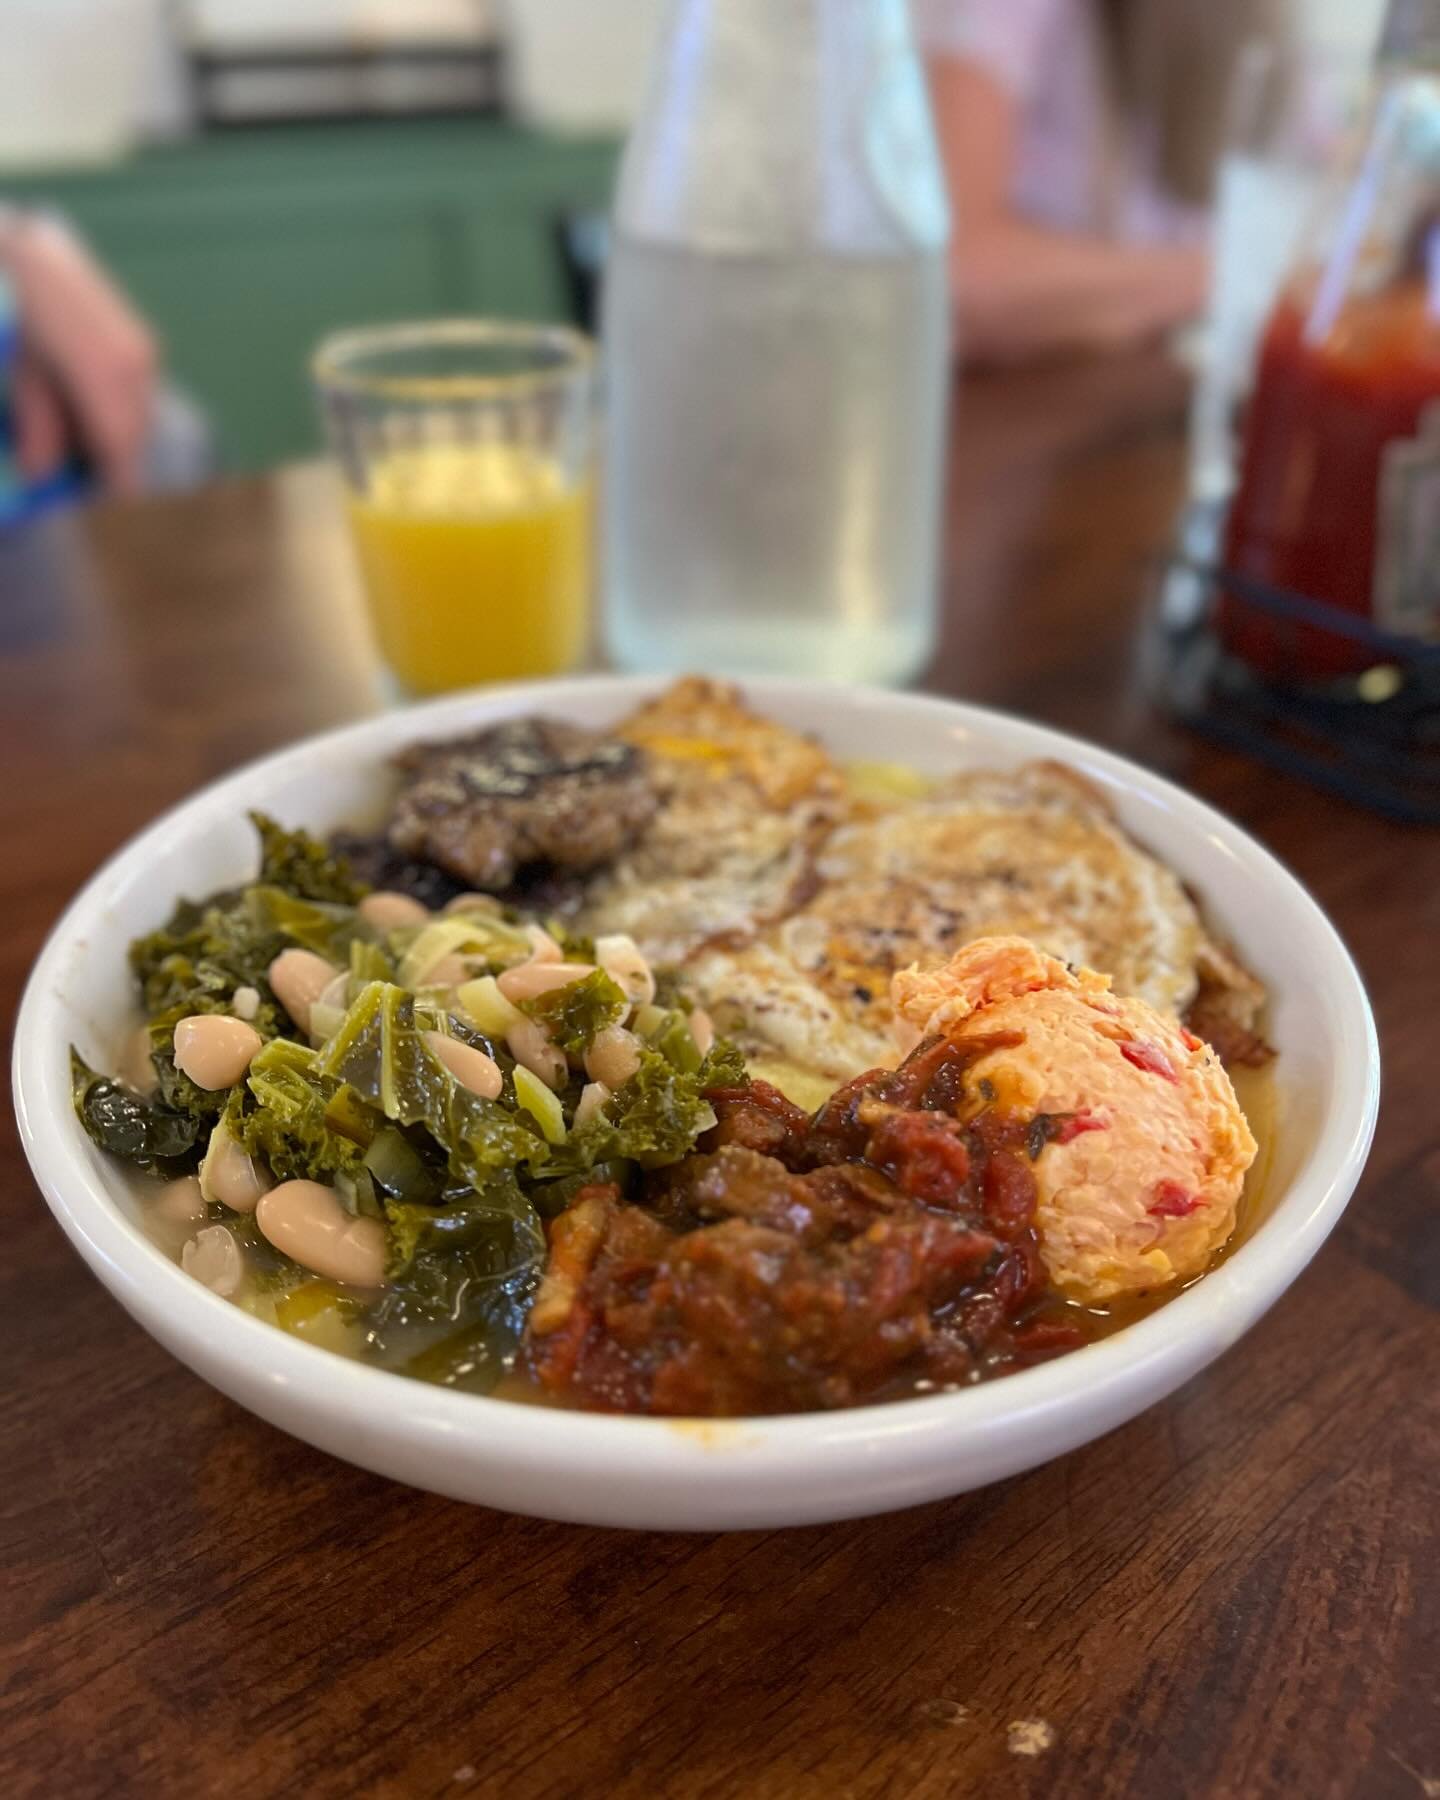 Reminder that we have brunch on Saturdays (10AM-1PM) and Sundays (10AM-2PM)! Pictured is the Grits Bowl with sausage and pimento cheese added. We are looking forward to the first MOTS of the season this evening (fingers crossed the weather holds out 